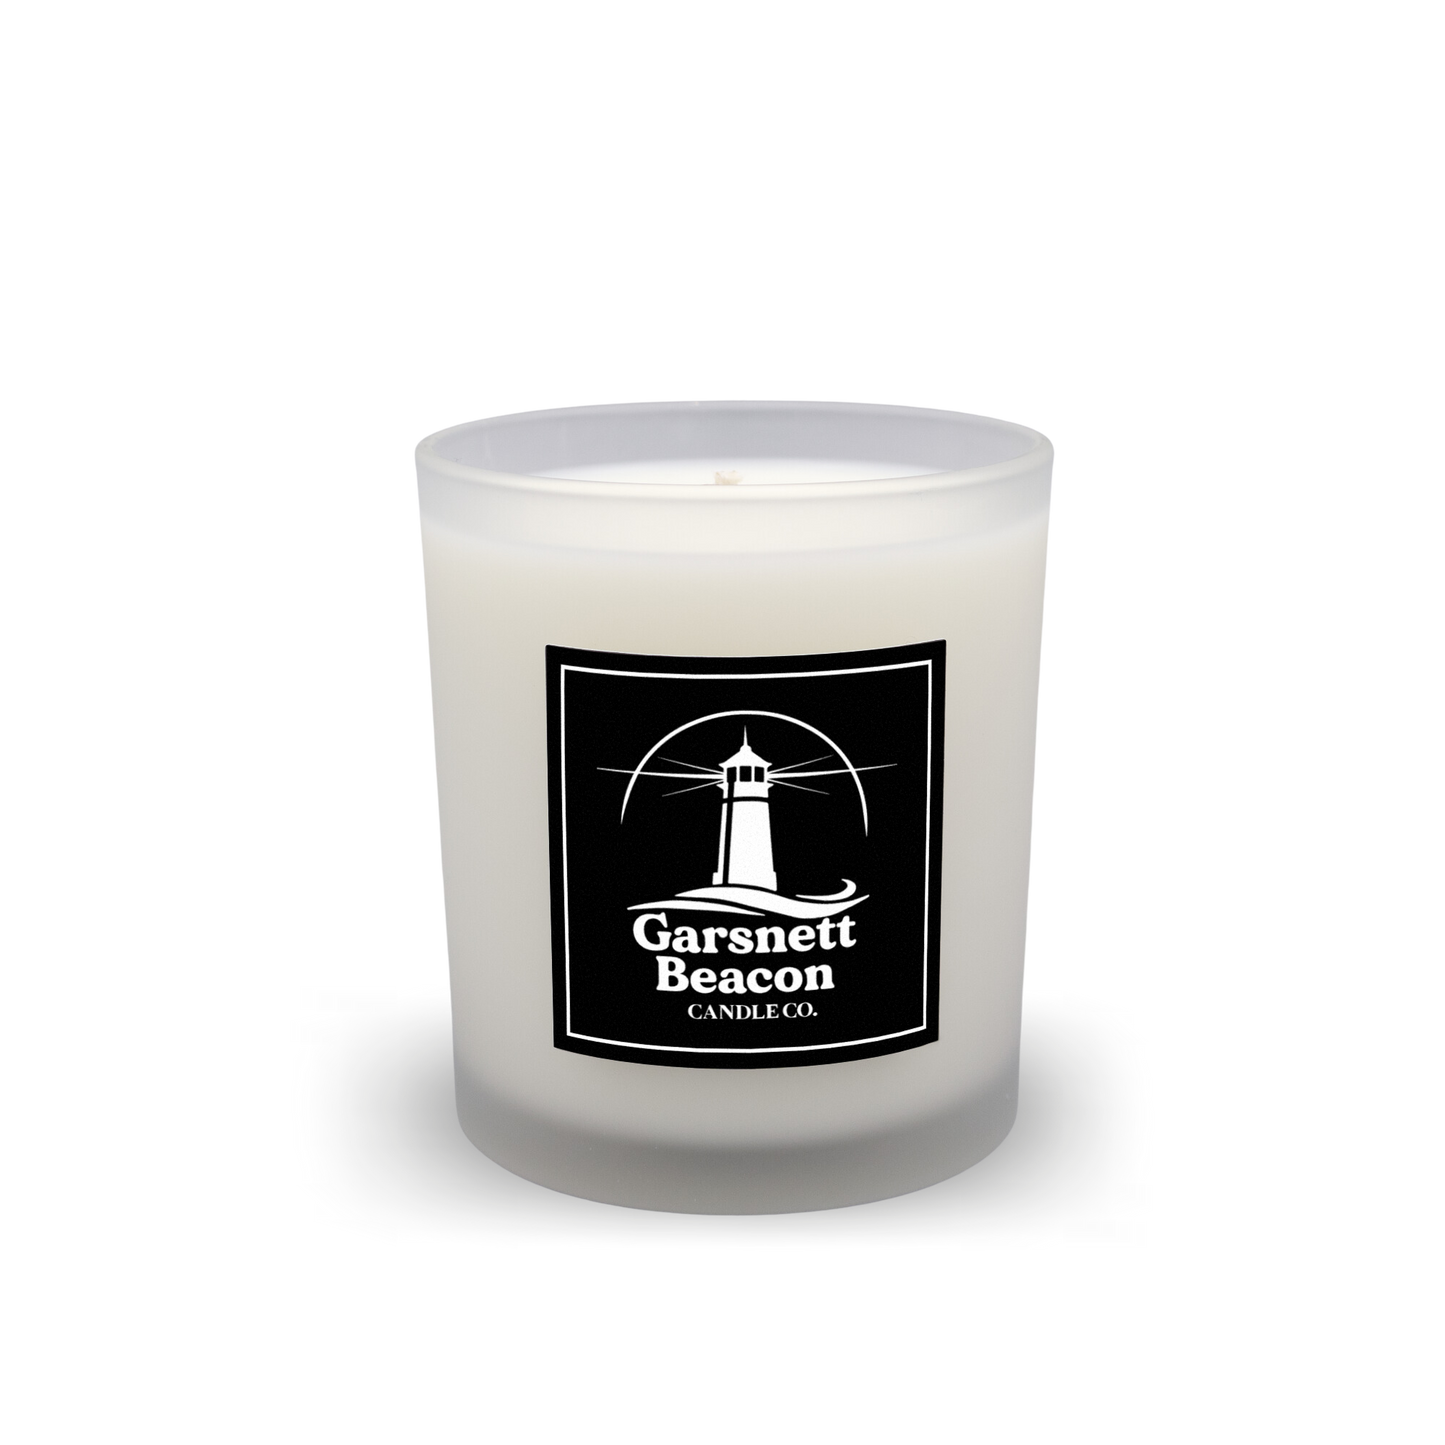 Autumn Apple - October Candle of the Month